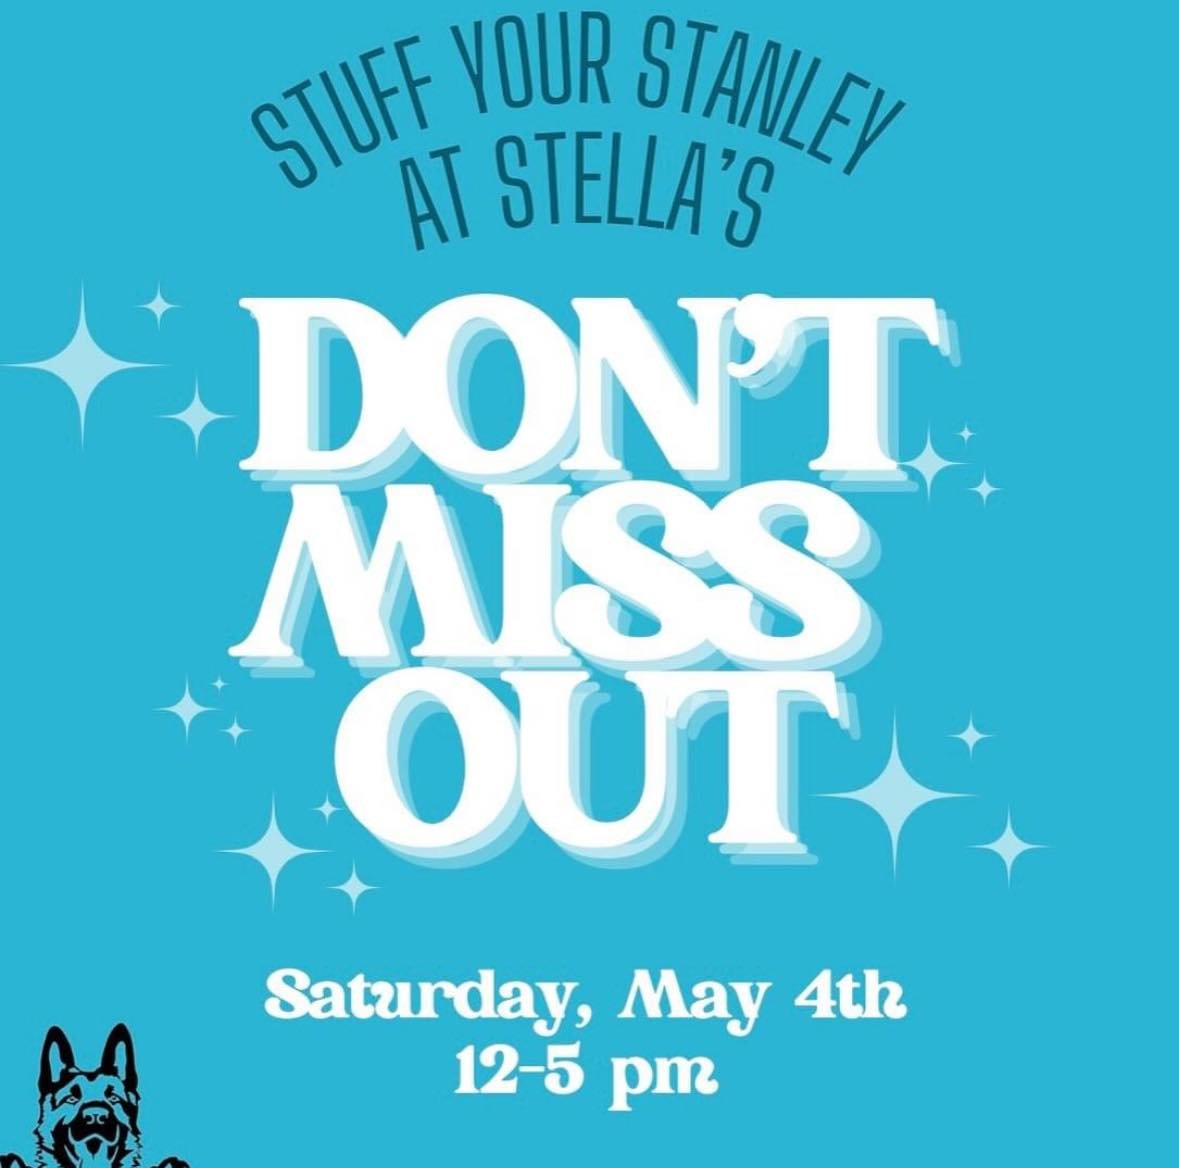 Stuff Your Stanley at Stella&rsquo;s 
Saturday, May 4th from 12-5 pm

Here&rsquo;s what you need to know:

-$10.49 (plus tax) for 4 scoops of ice cream!
-ANY 32-40 oz tumbler 
-Please be patient, this is our first time!
-Tumbler must be clean and emp